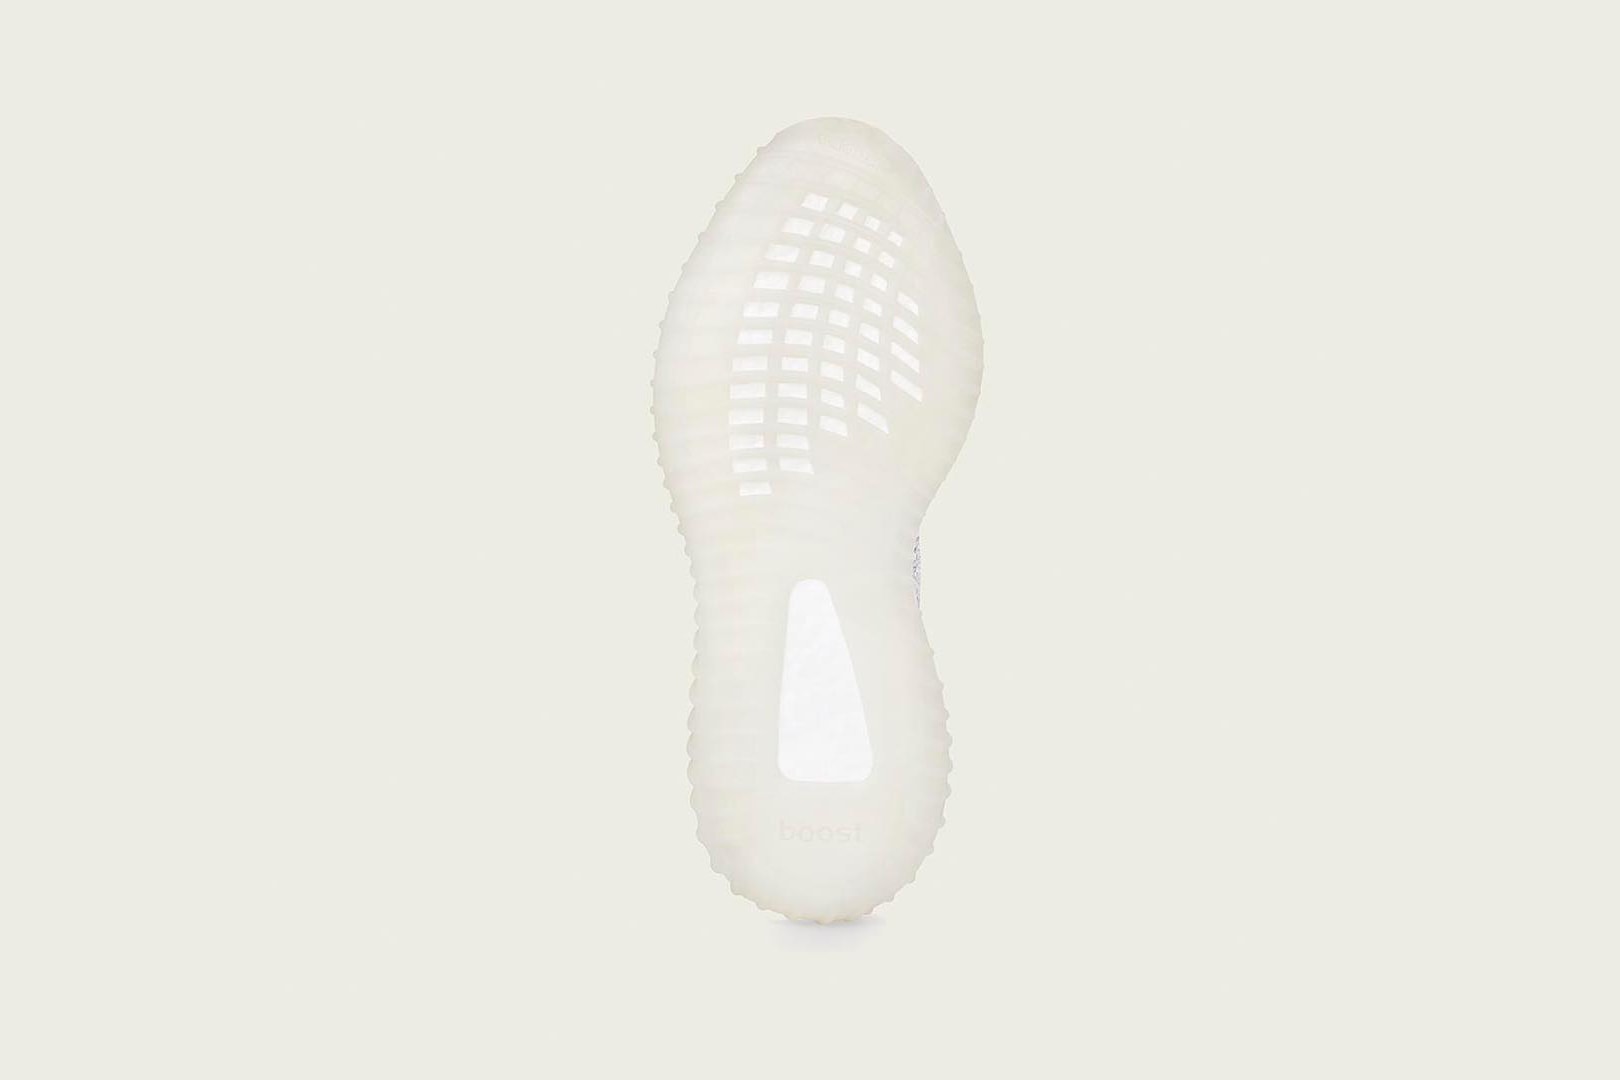 YEEZY BOOST 350 V2 Boutique France Guide